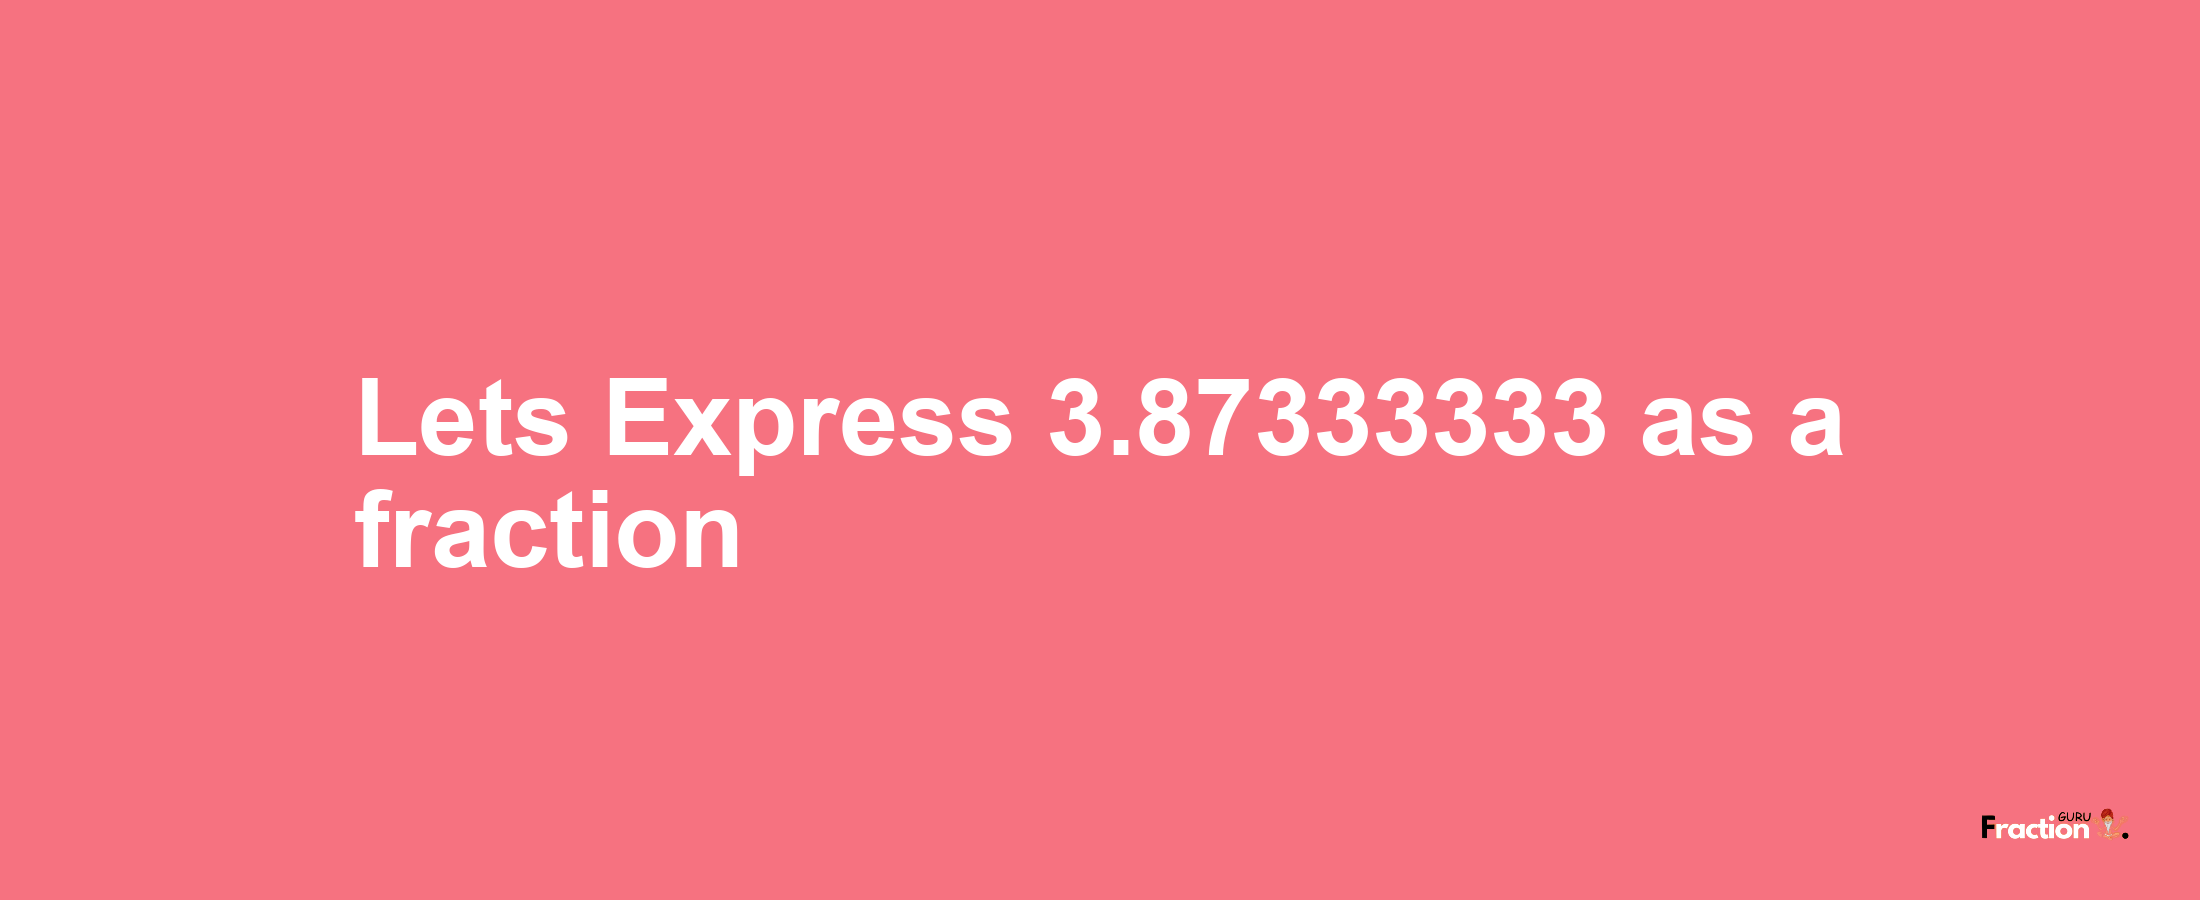 Lets Express 3.87333333 as afraction